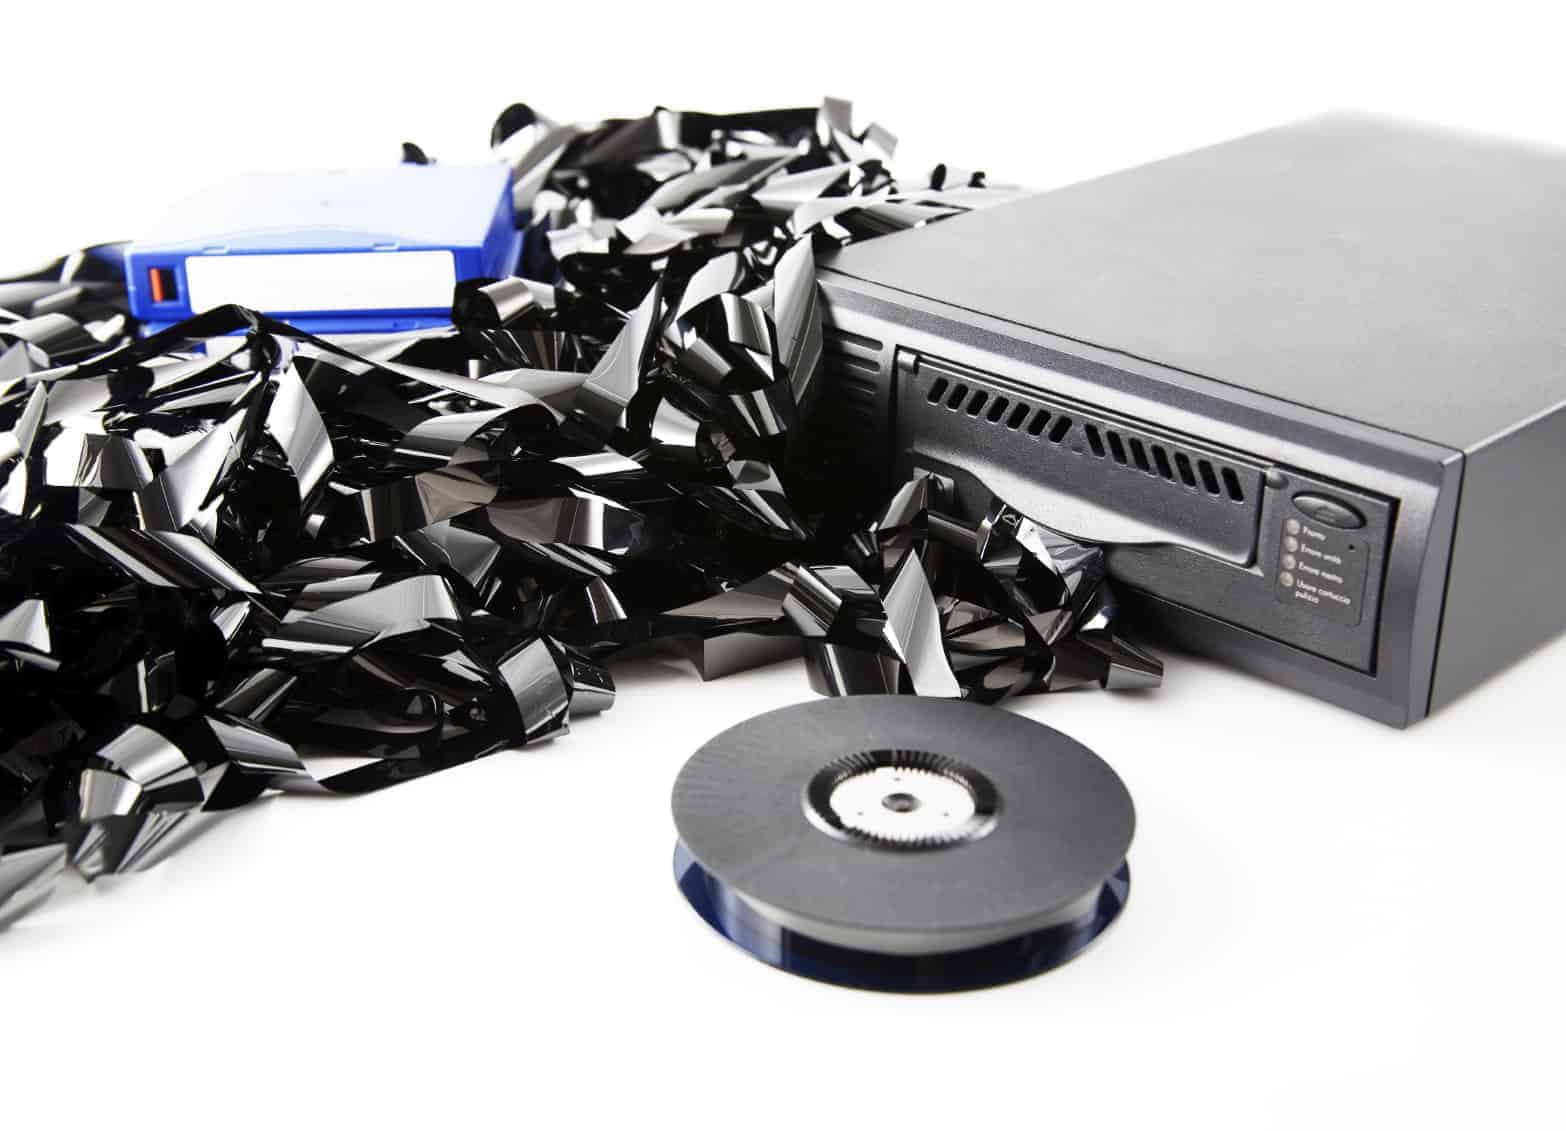 Online backup for schools and disaster recovery strategy plan